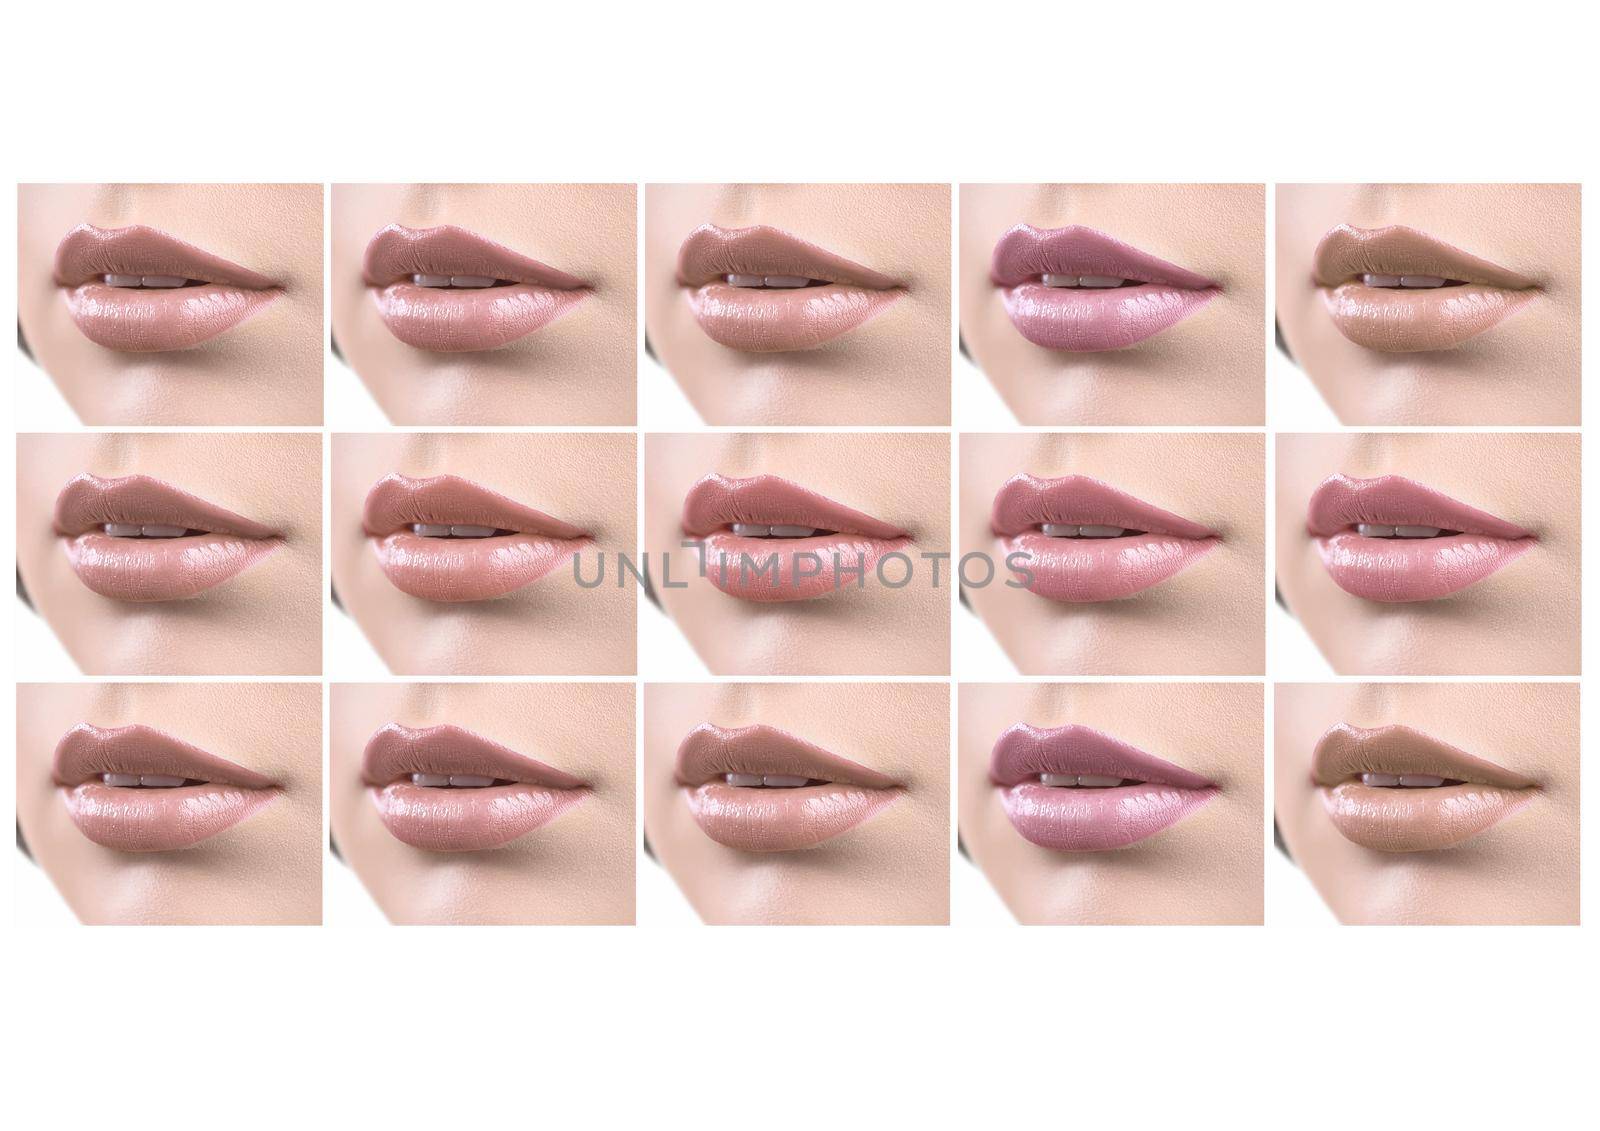 Set of female lips covered with nude natural colored lipsticks isolated on white copyspace makeup visage beauty cosmetics fashion mouth sexy seductive sensual softness concept